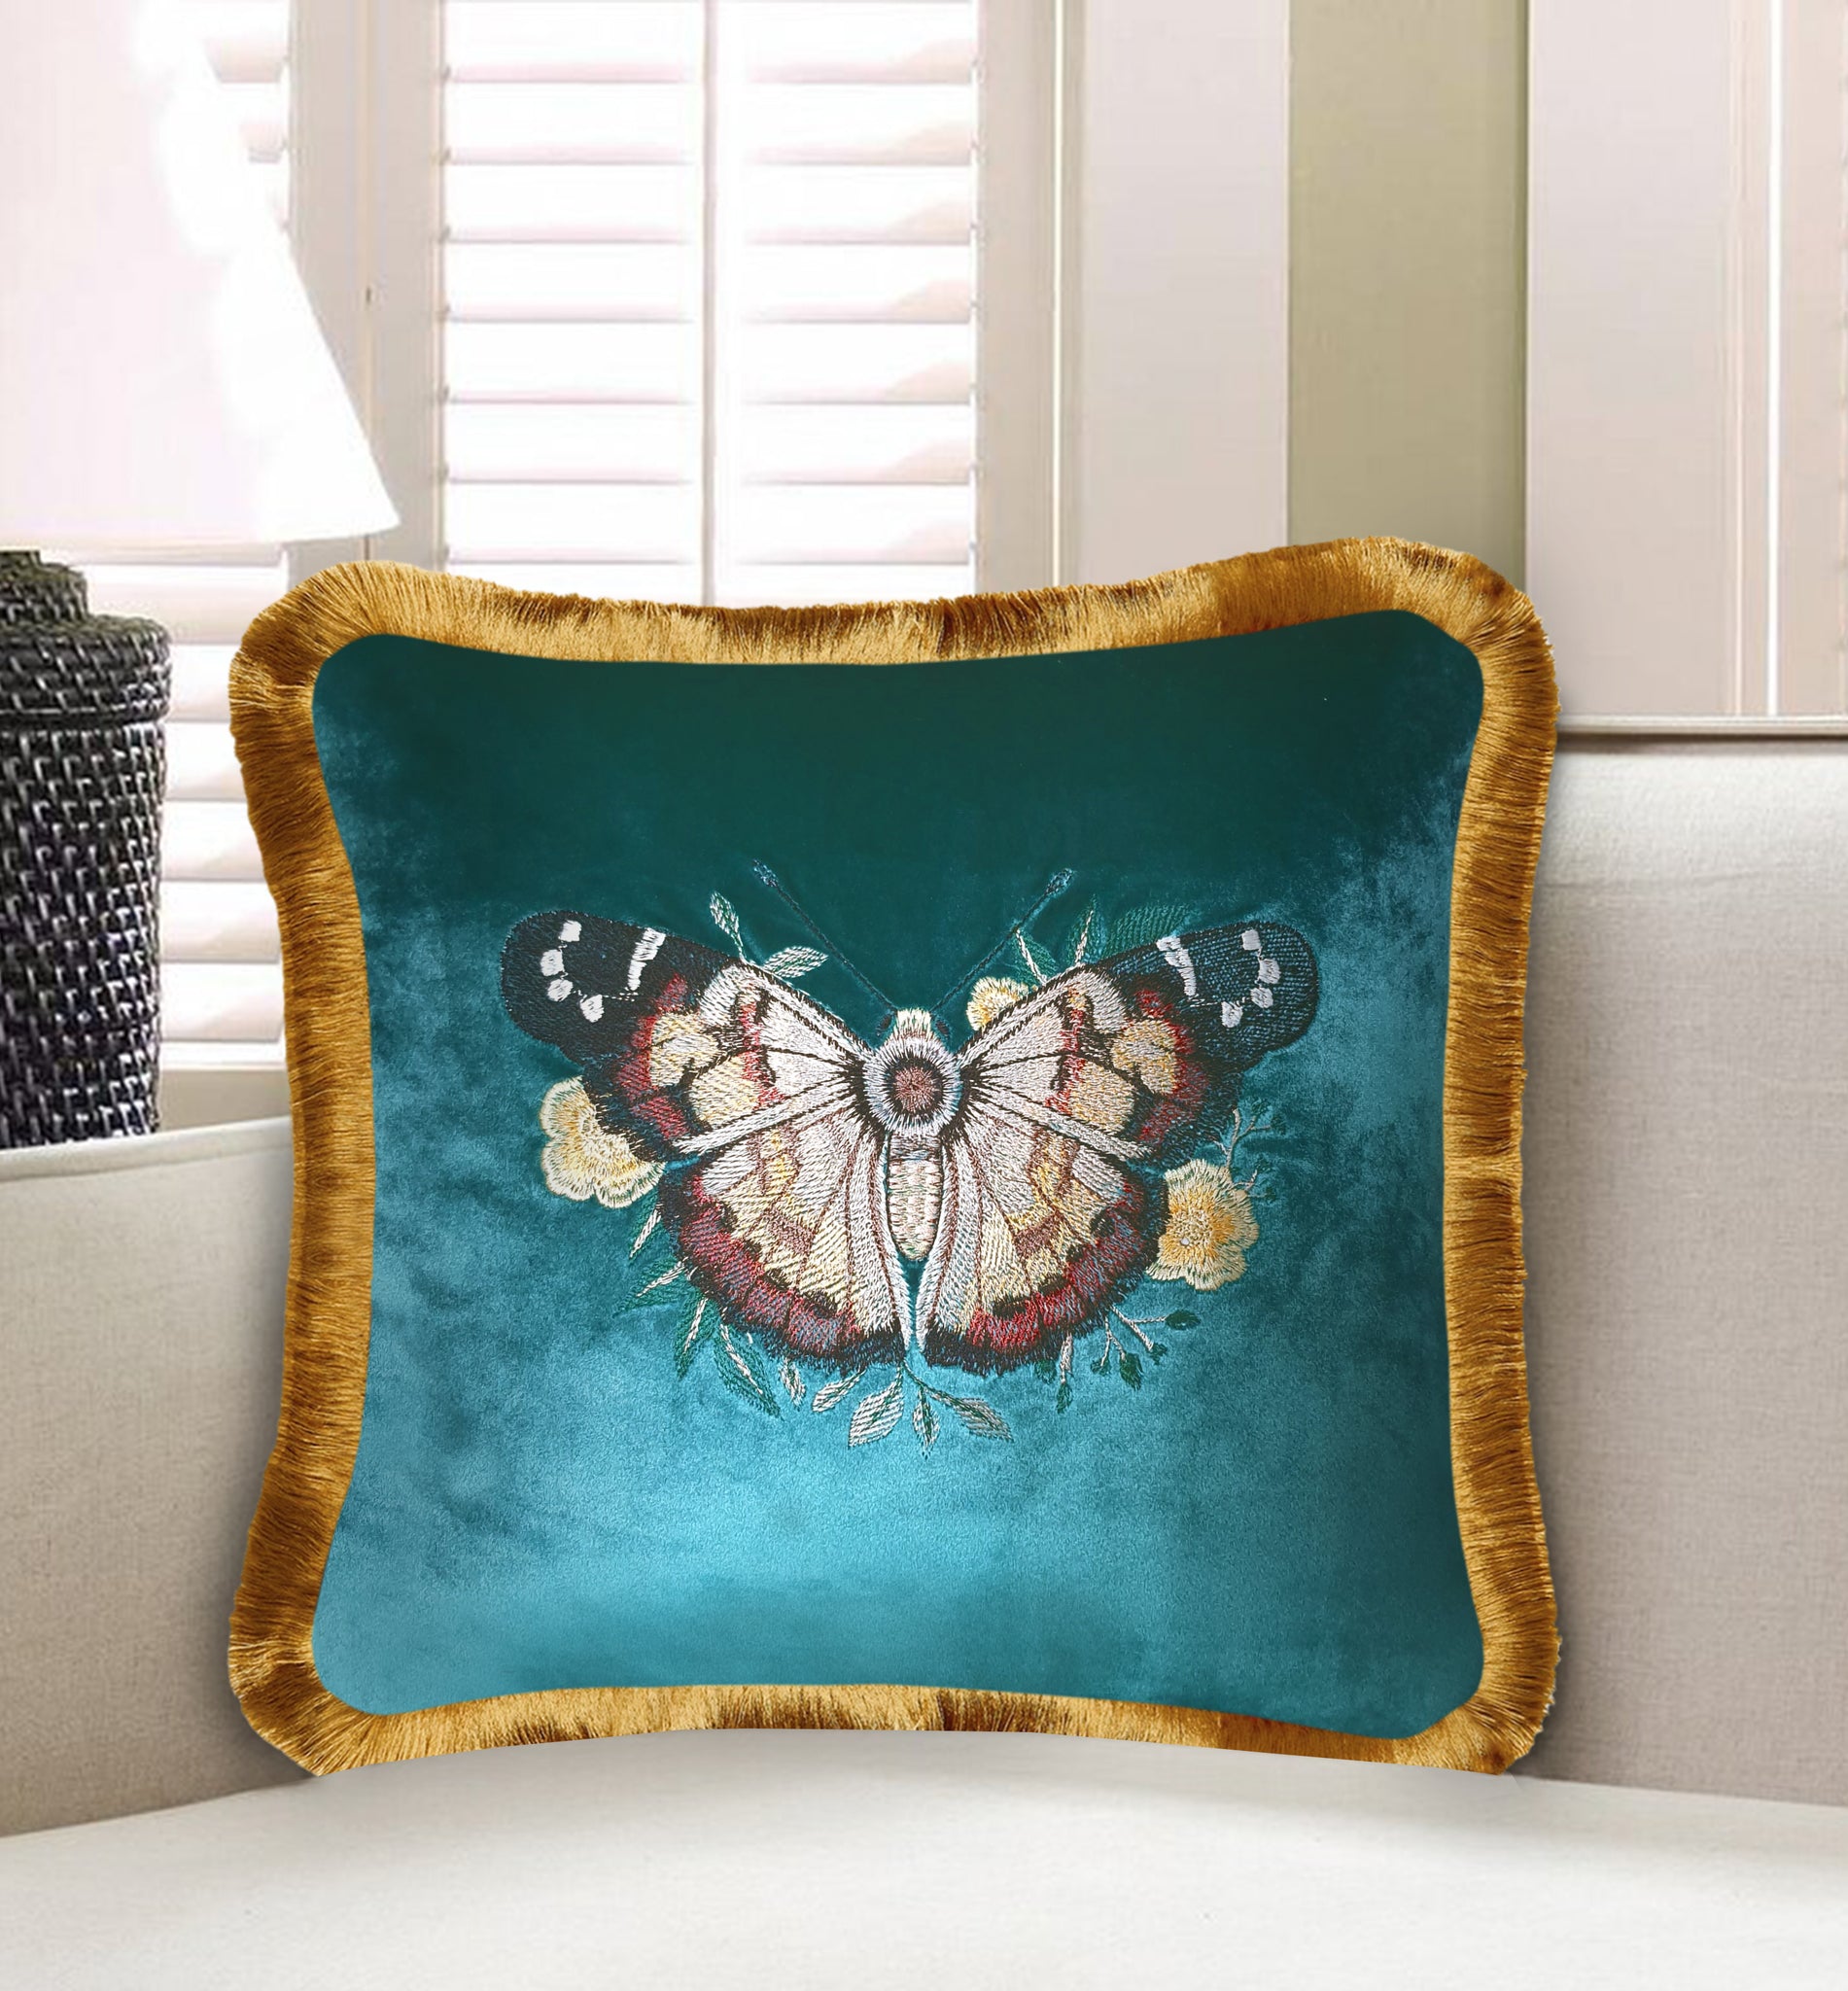 Velvet Cushion Cover Colorful Butterfly Embroidery Decorative Pillowcase Modern Home Decor Throw Pillow for Sofa Chair 45x45 cm